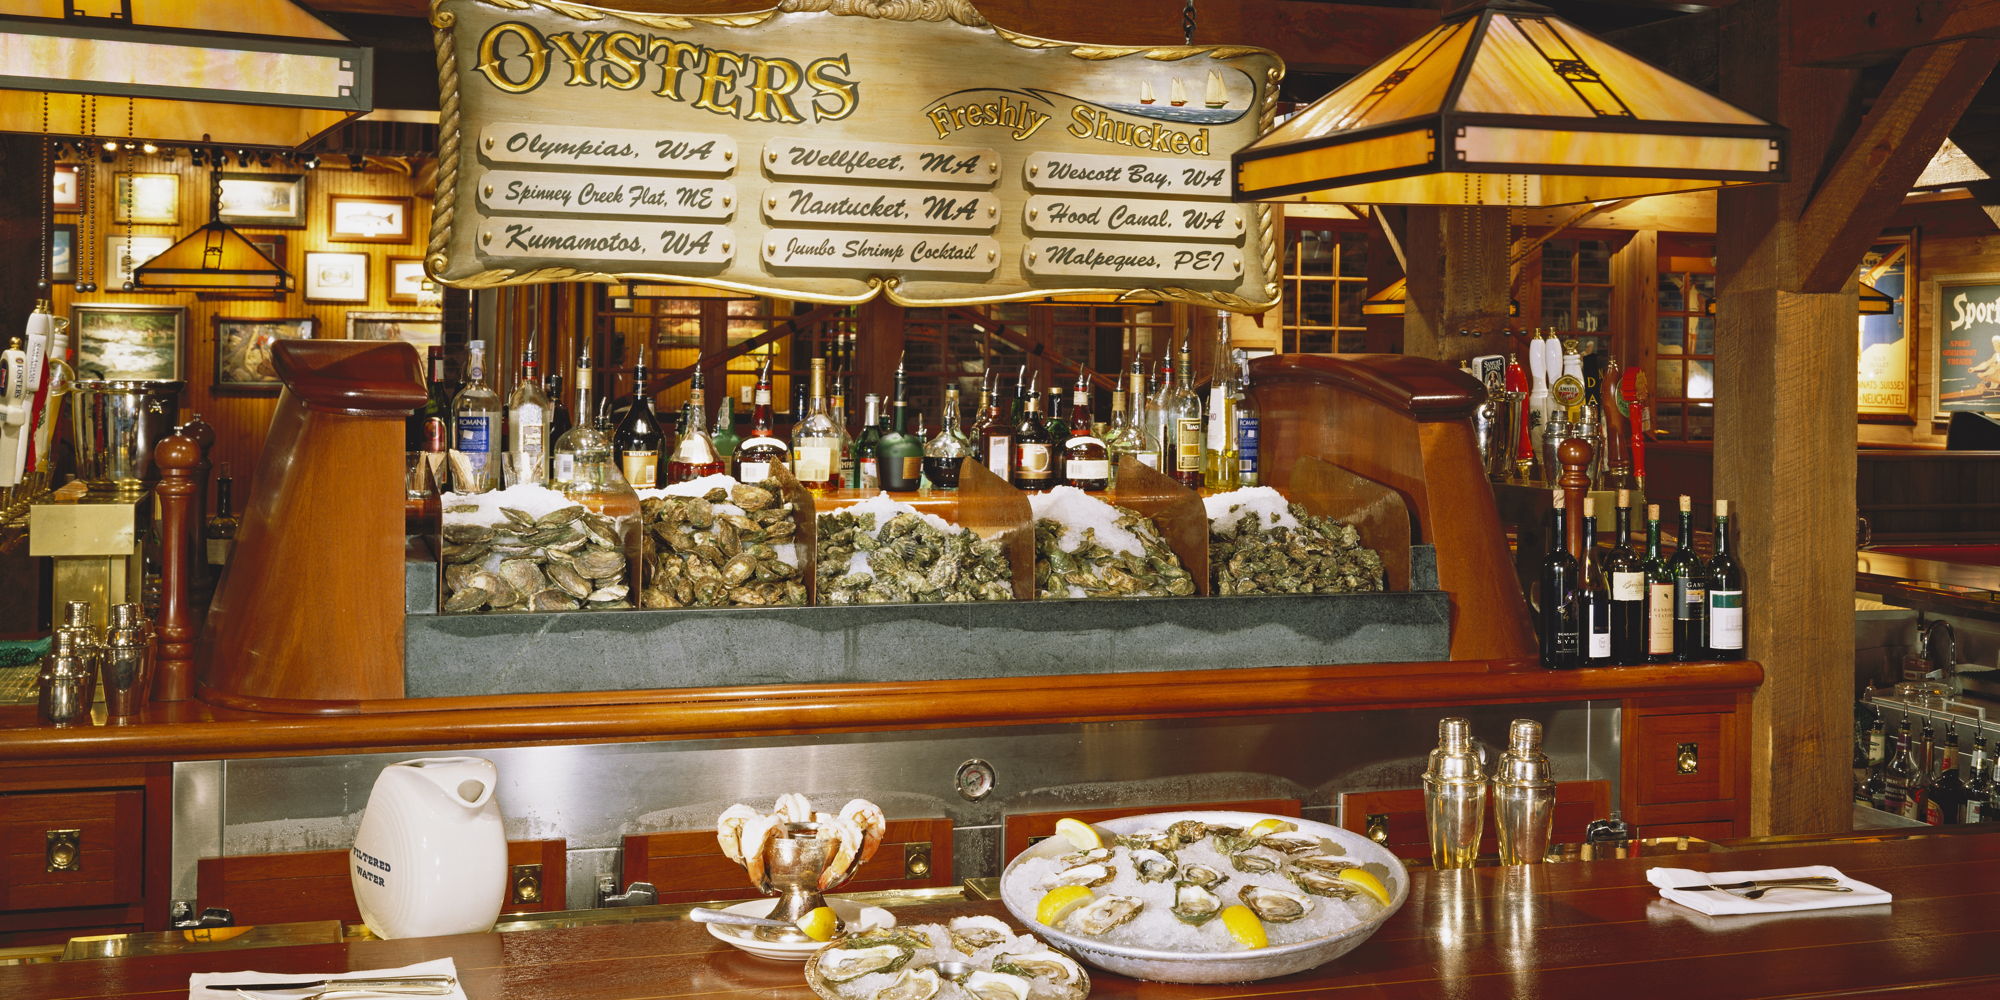 Oyster Happy Hour at Clyde's of Mark Center promotional image